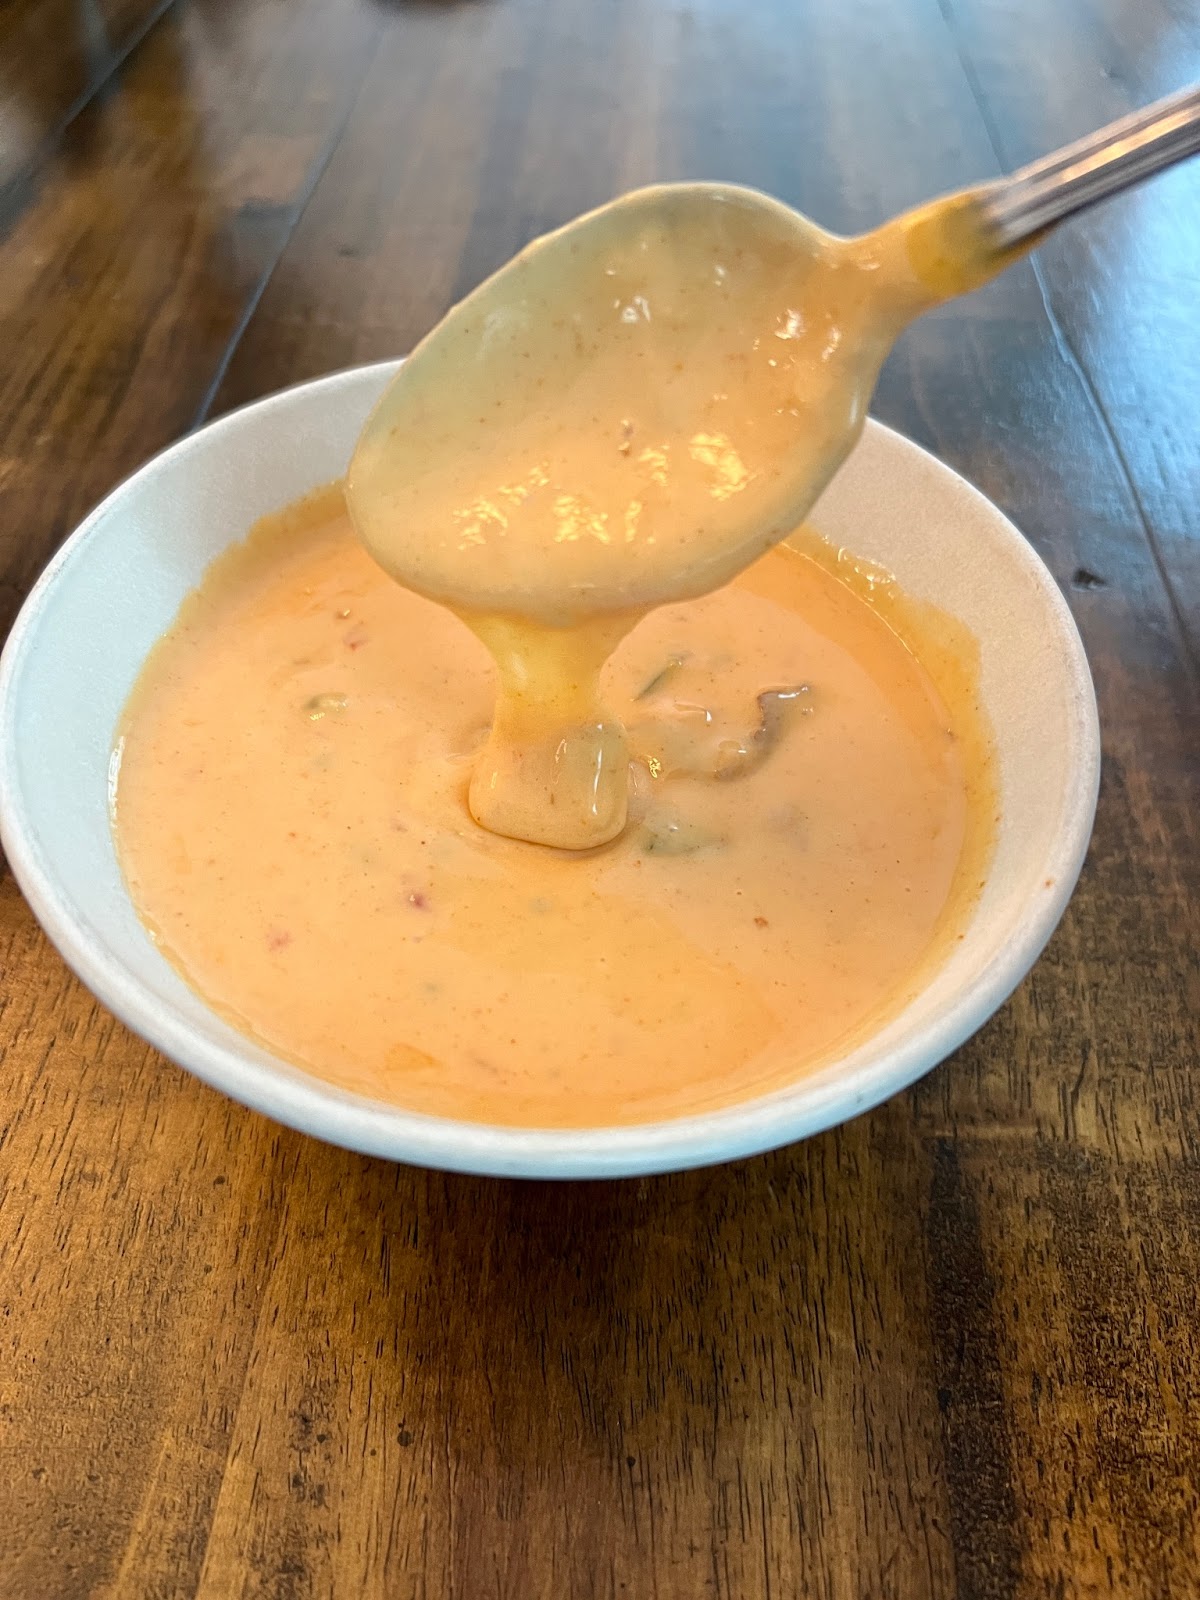 Restaurant style queso ready to enjoy